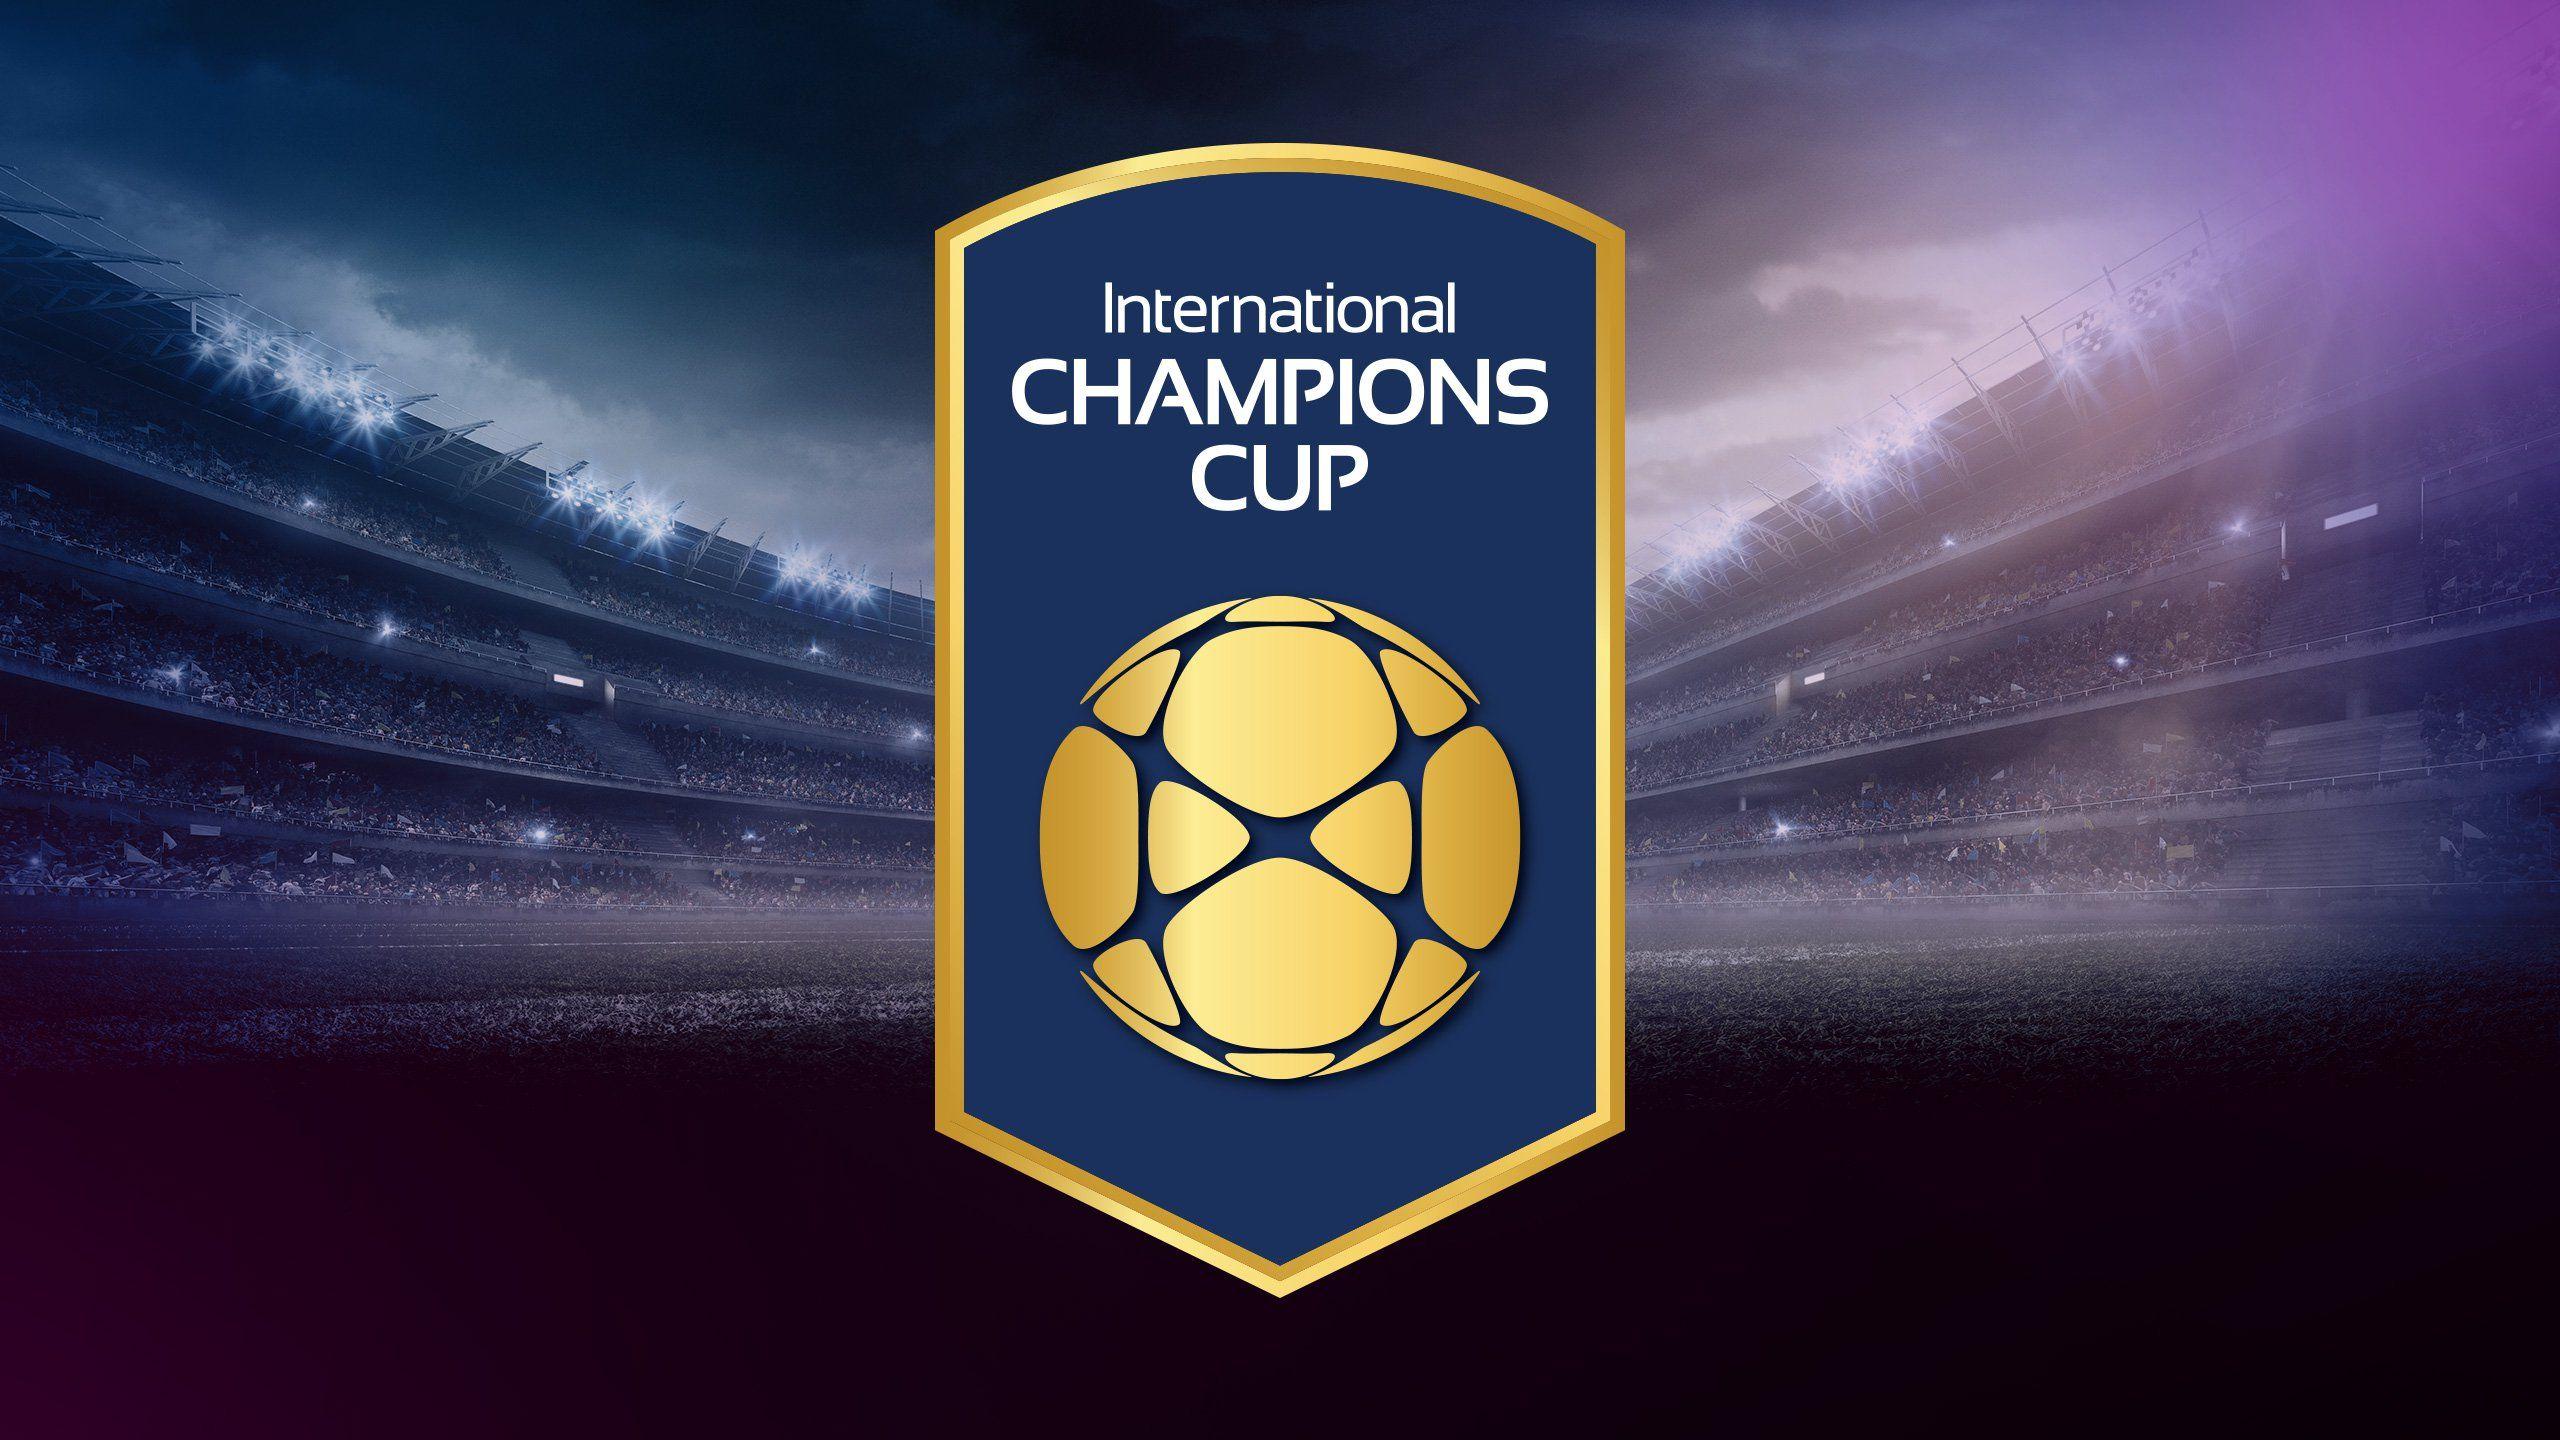 International Champions Cup Wallpapers Wallpaper Cave